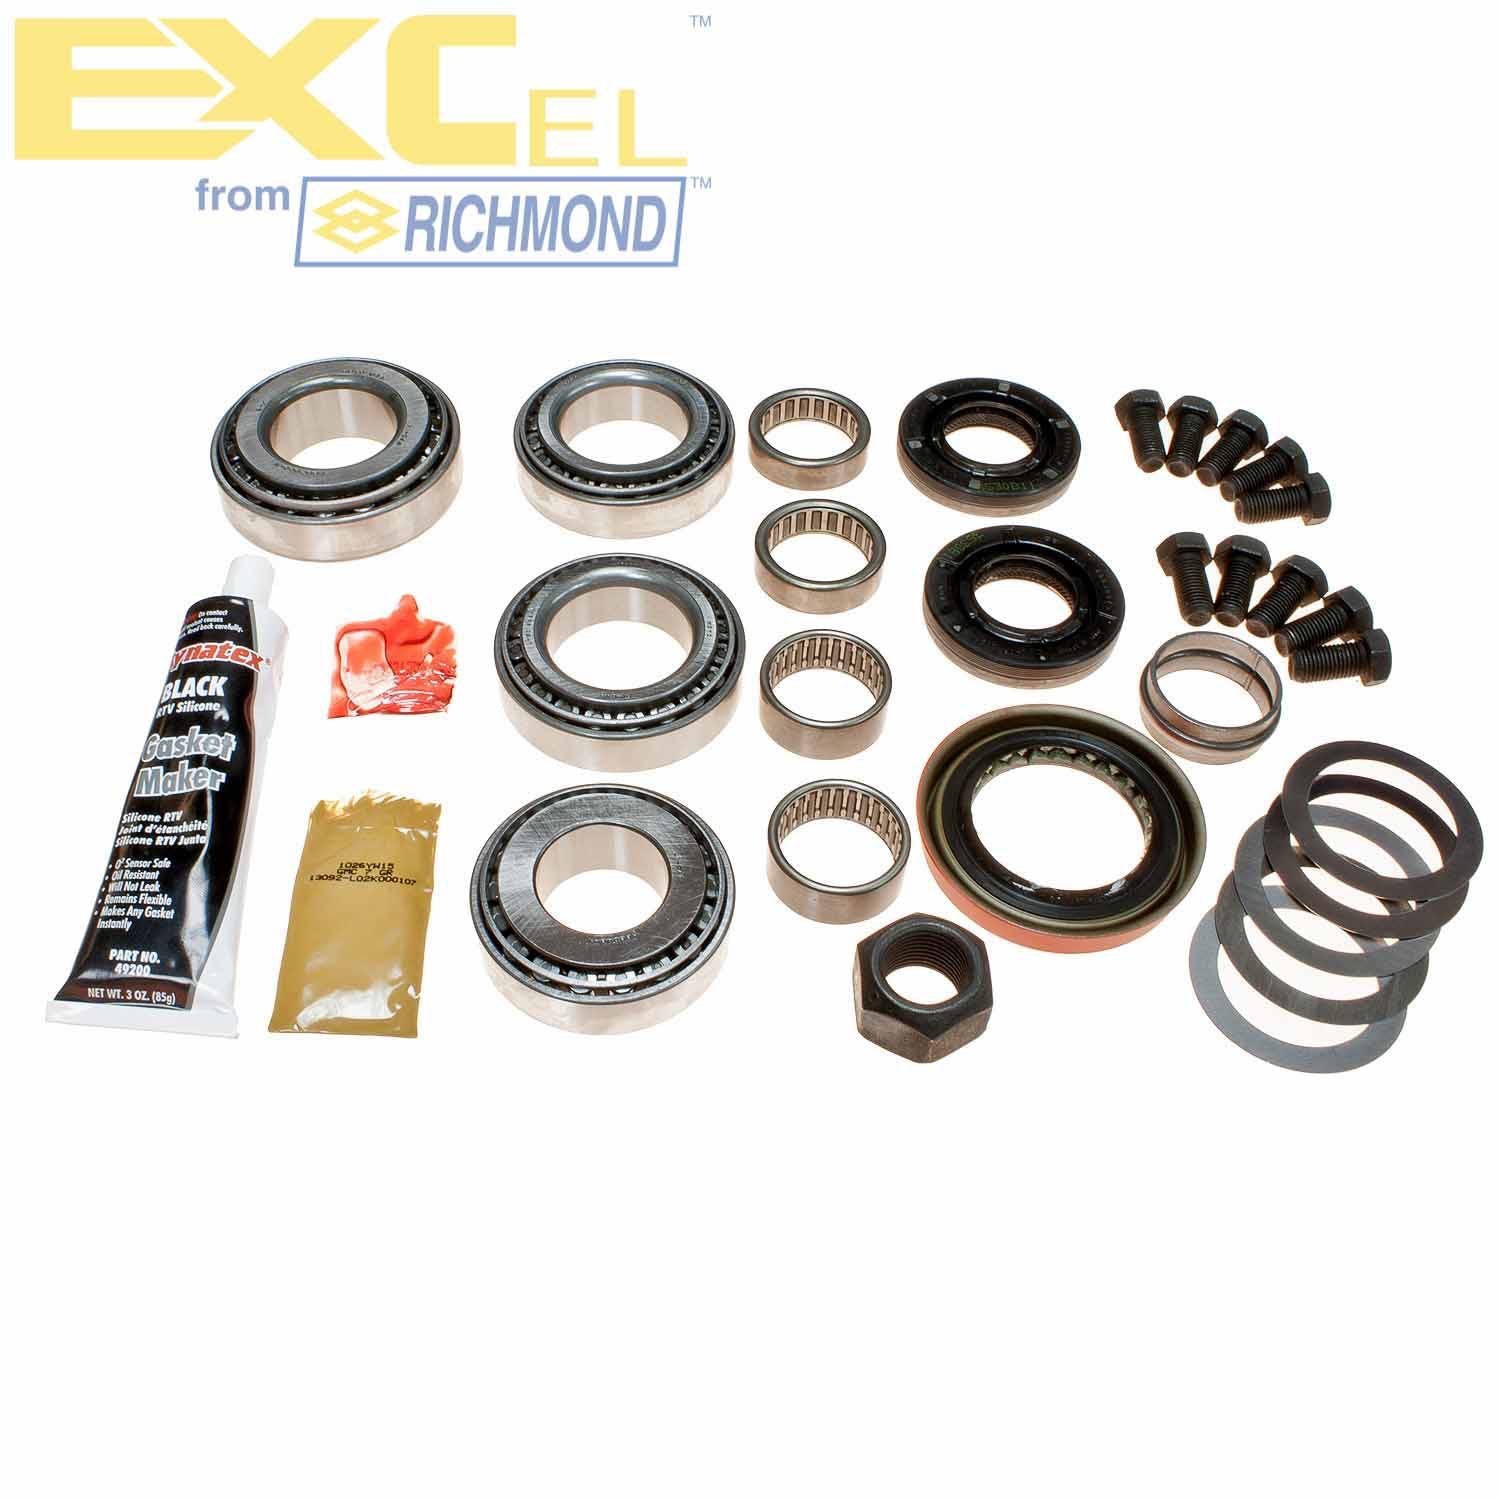 Excel XL-1023-1 Differential Bearing Kit